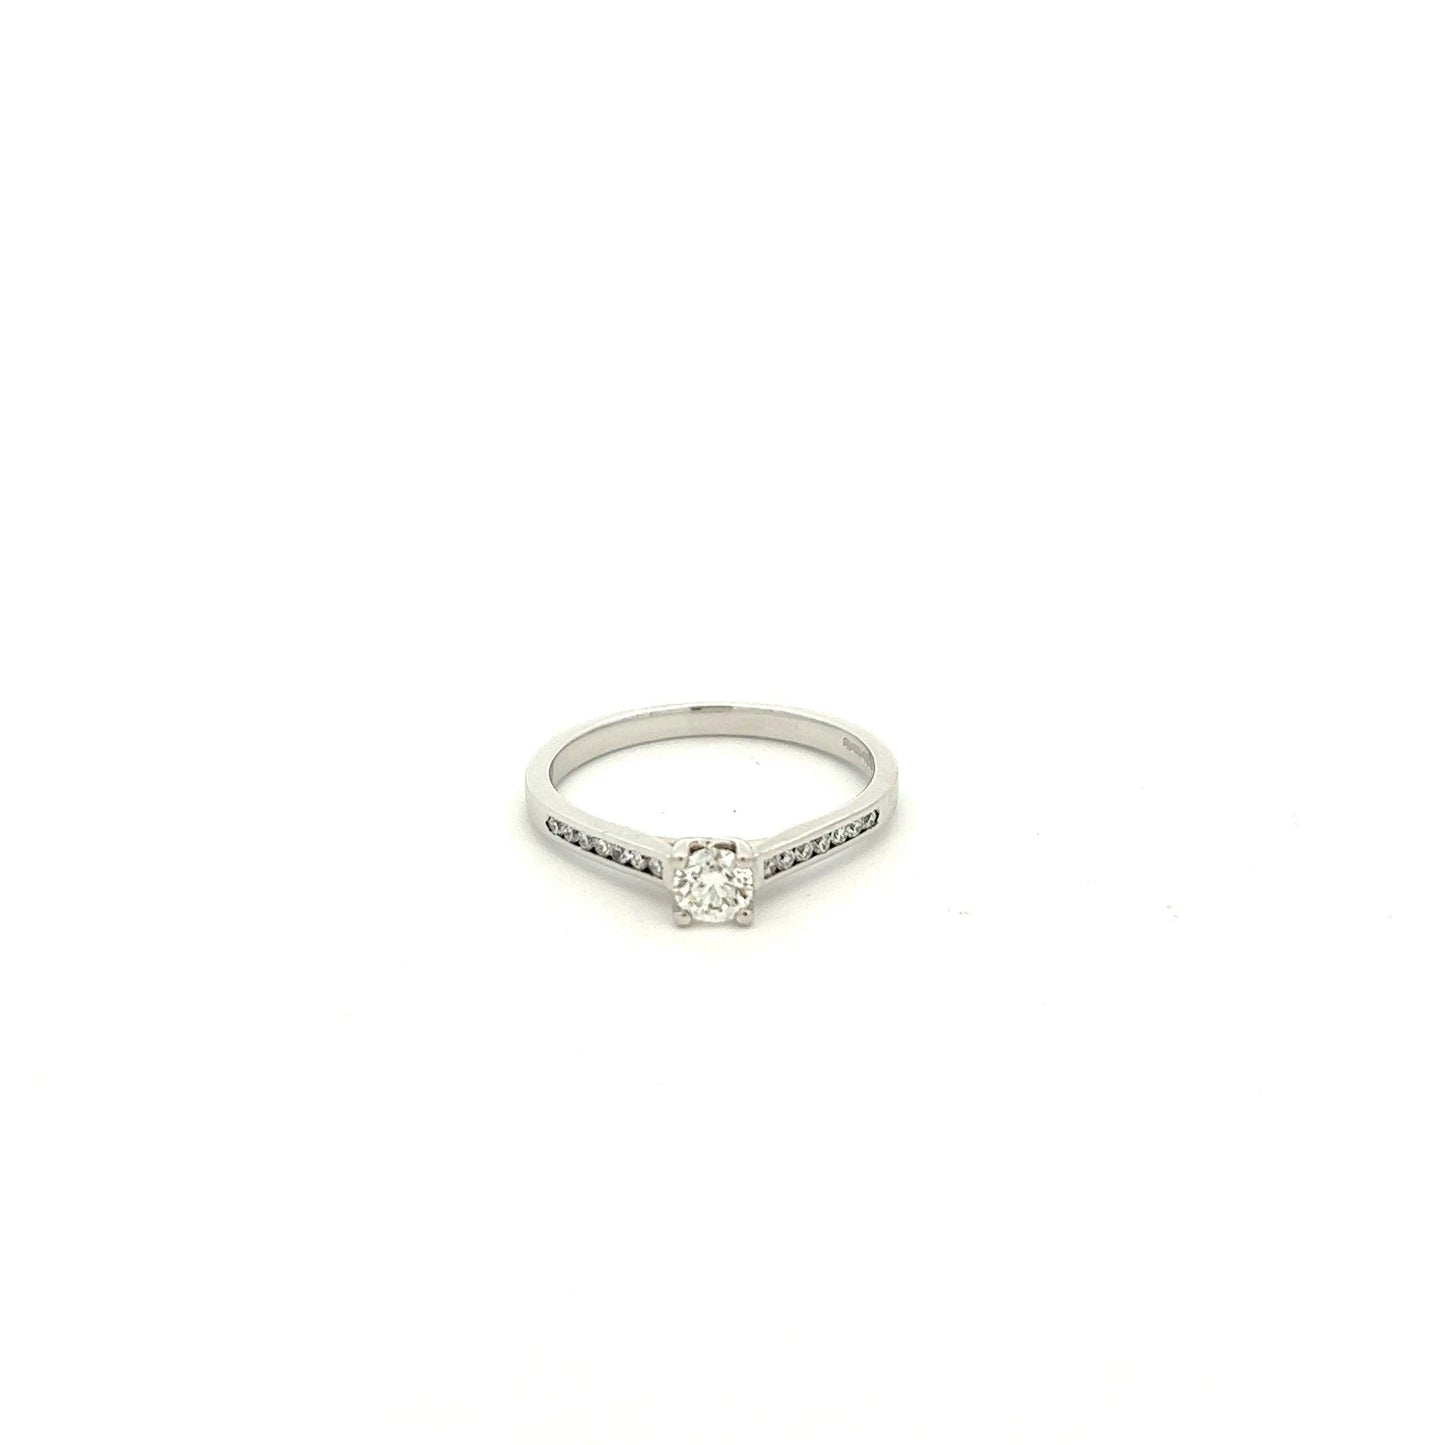 18ct White Gold 0.28ct Brilliant Cut Diamond Ring with Diamond Shoulders